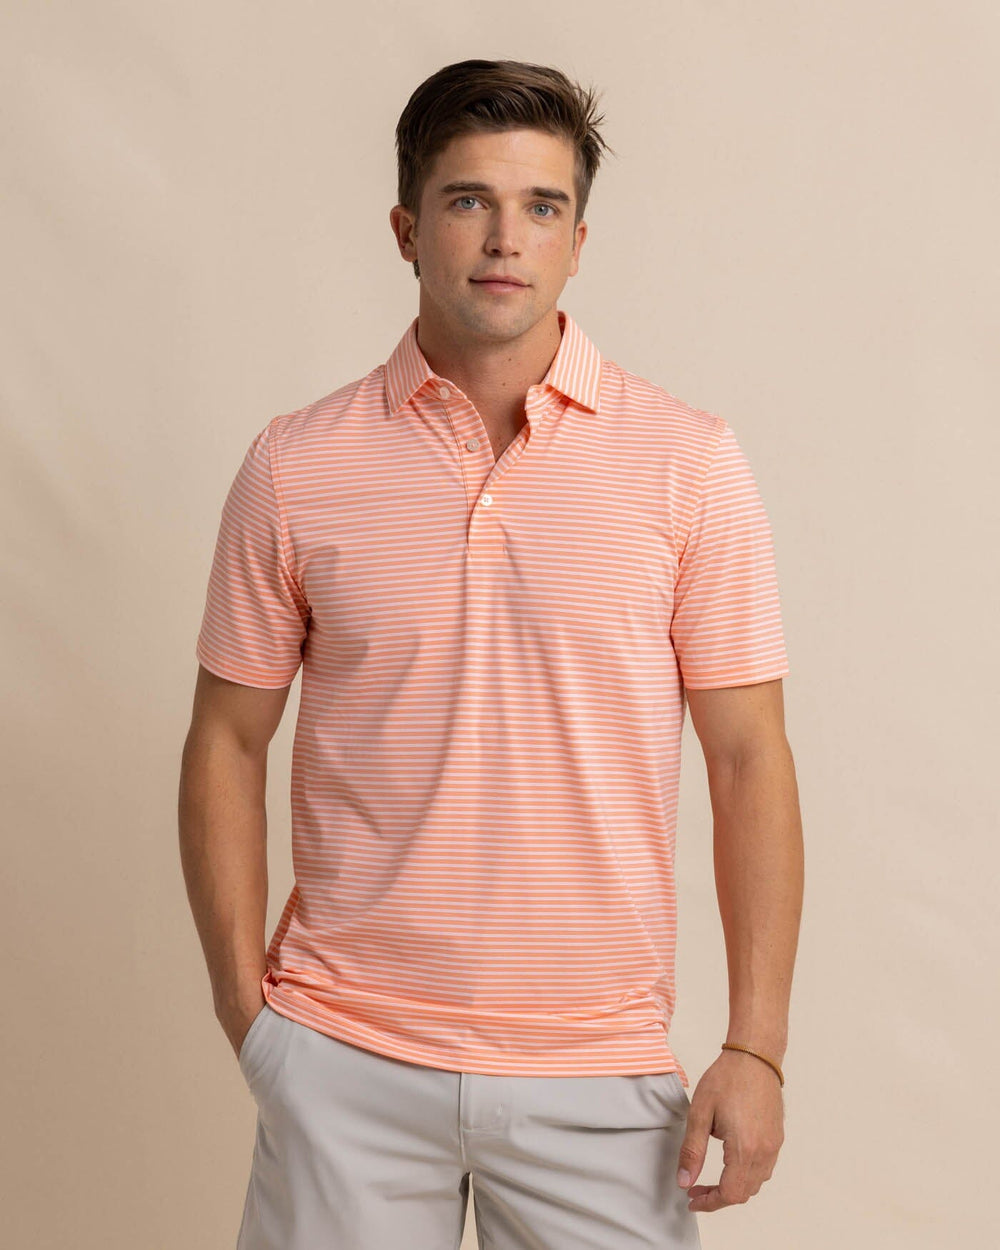 The front view of the Southern Tide brrr eeze Beattie Stripe Performance Polo by Southern Tide - Desert Flower Coral